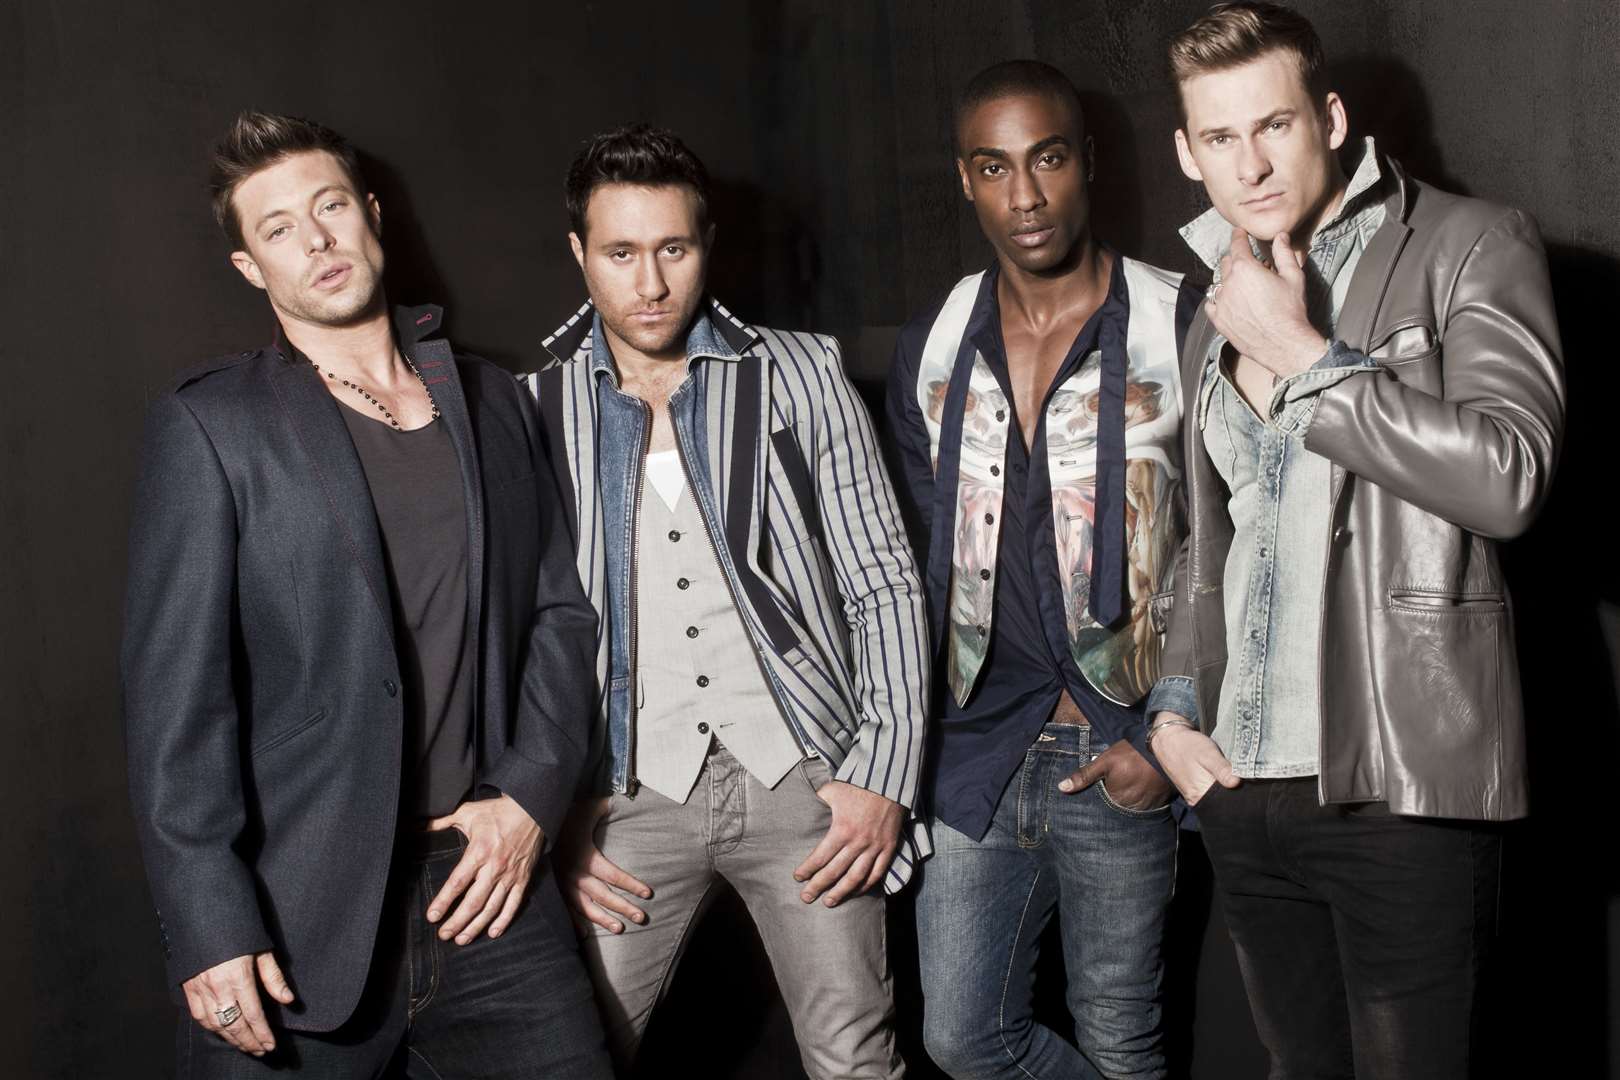 Boyband Blue re-united for the Eurovision Song Contest in 2011 Photo: Charlotte Sweeney